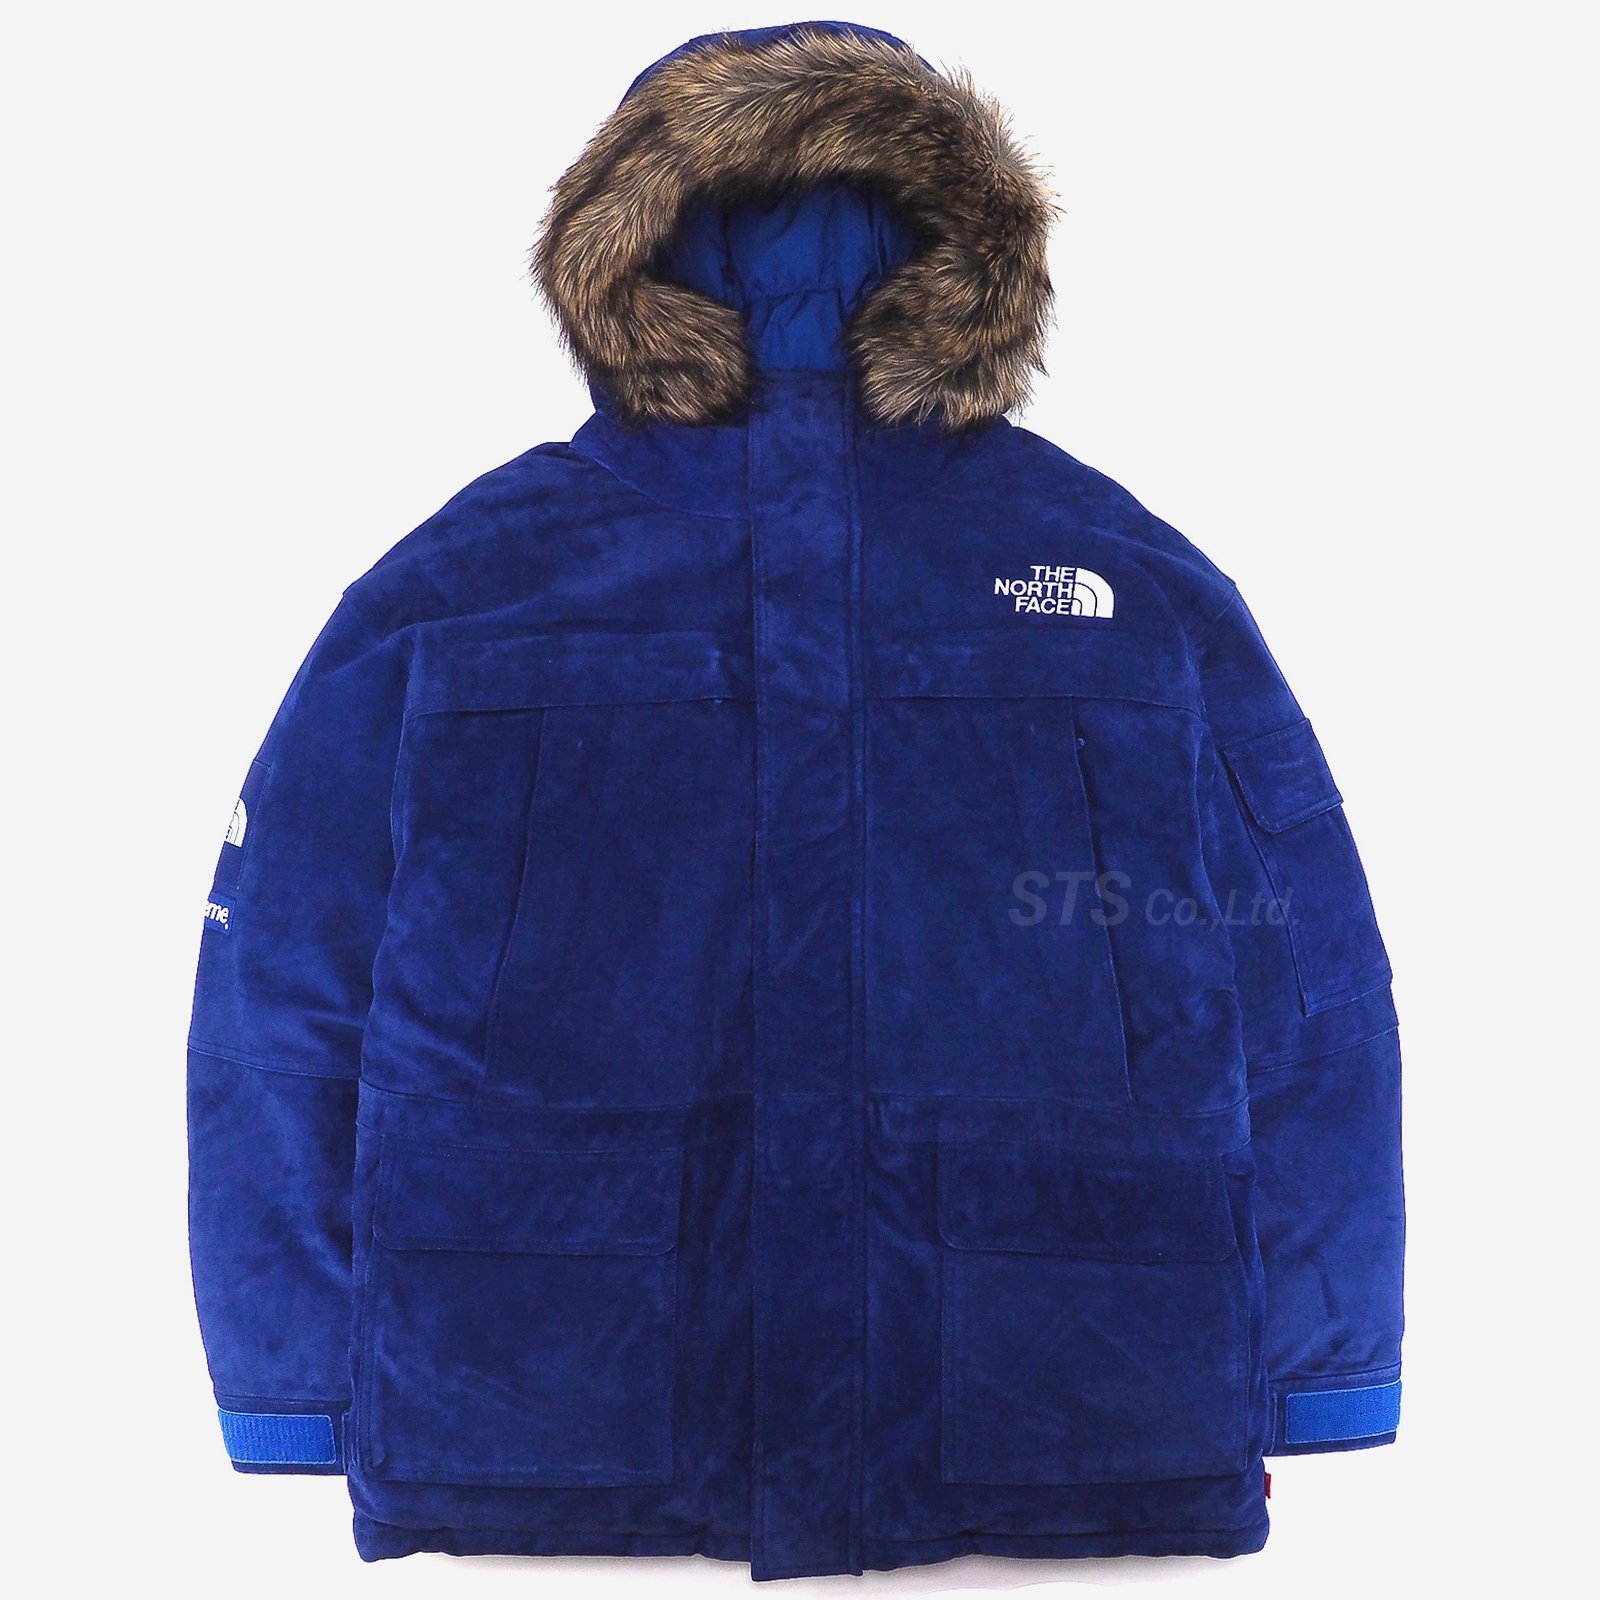 Supreme/The North Face Suede 600 Fill Down Parka | シュプリーム x 